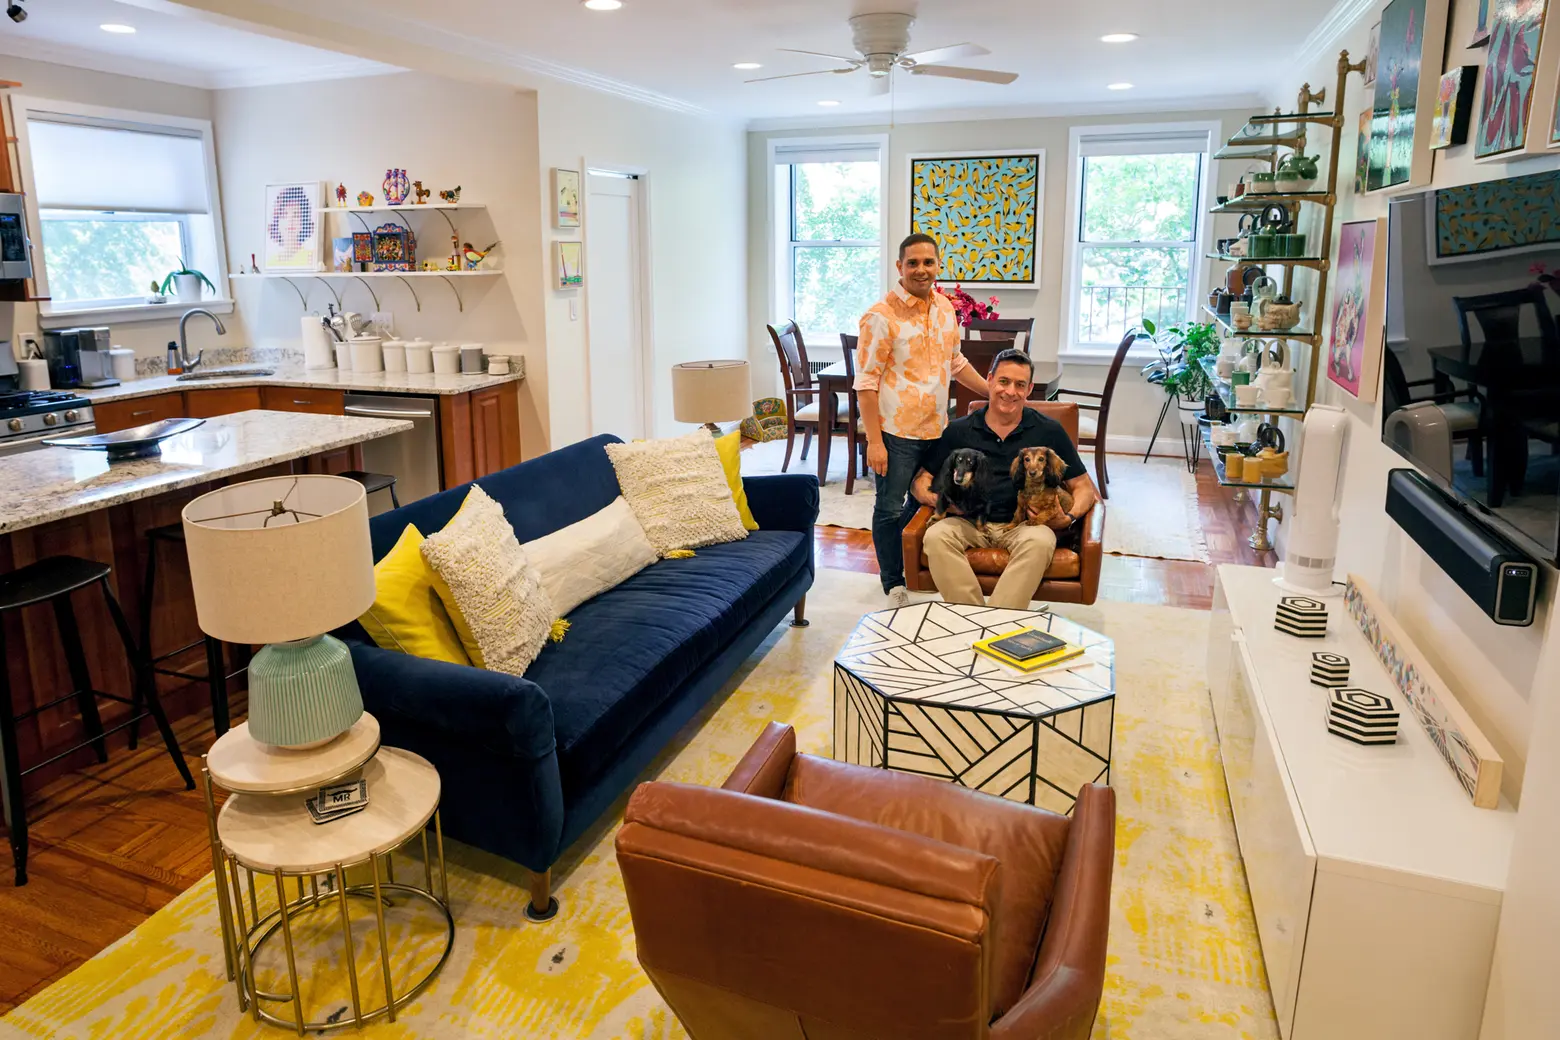 Our 1,100sqft: A move to the Bay Ridge waterfront gave this couple serenity and space